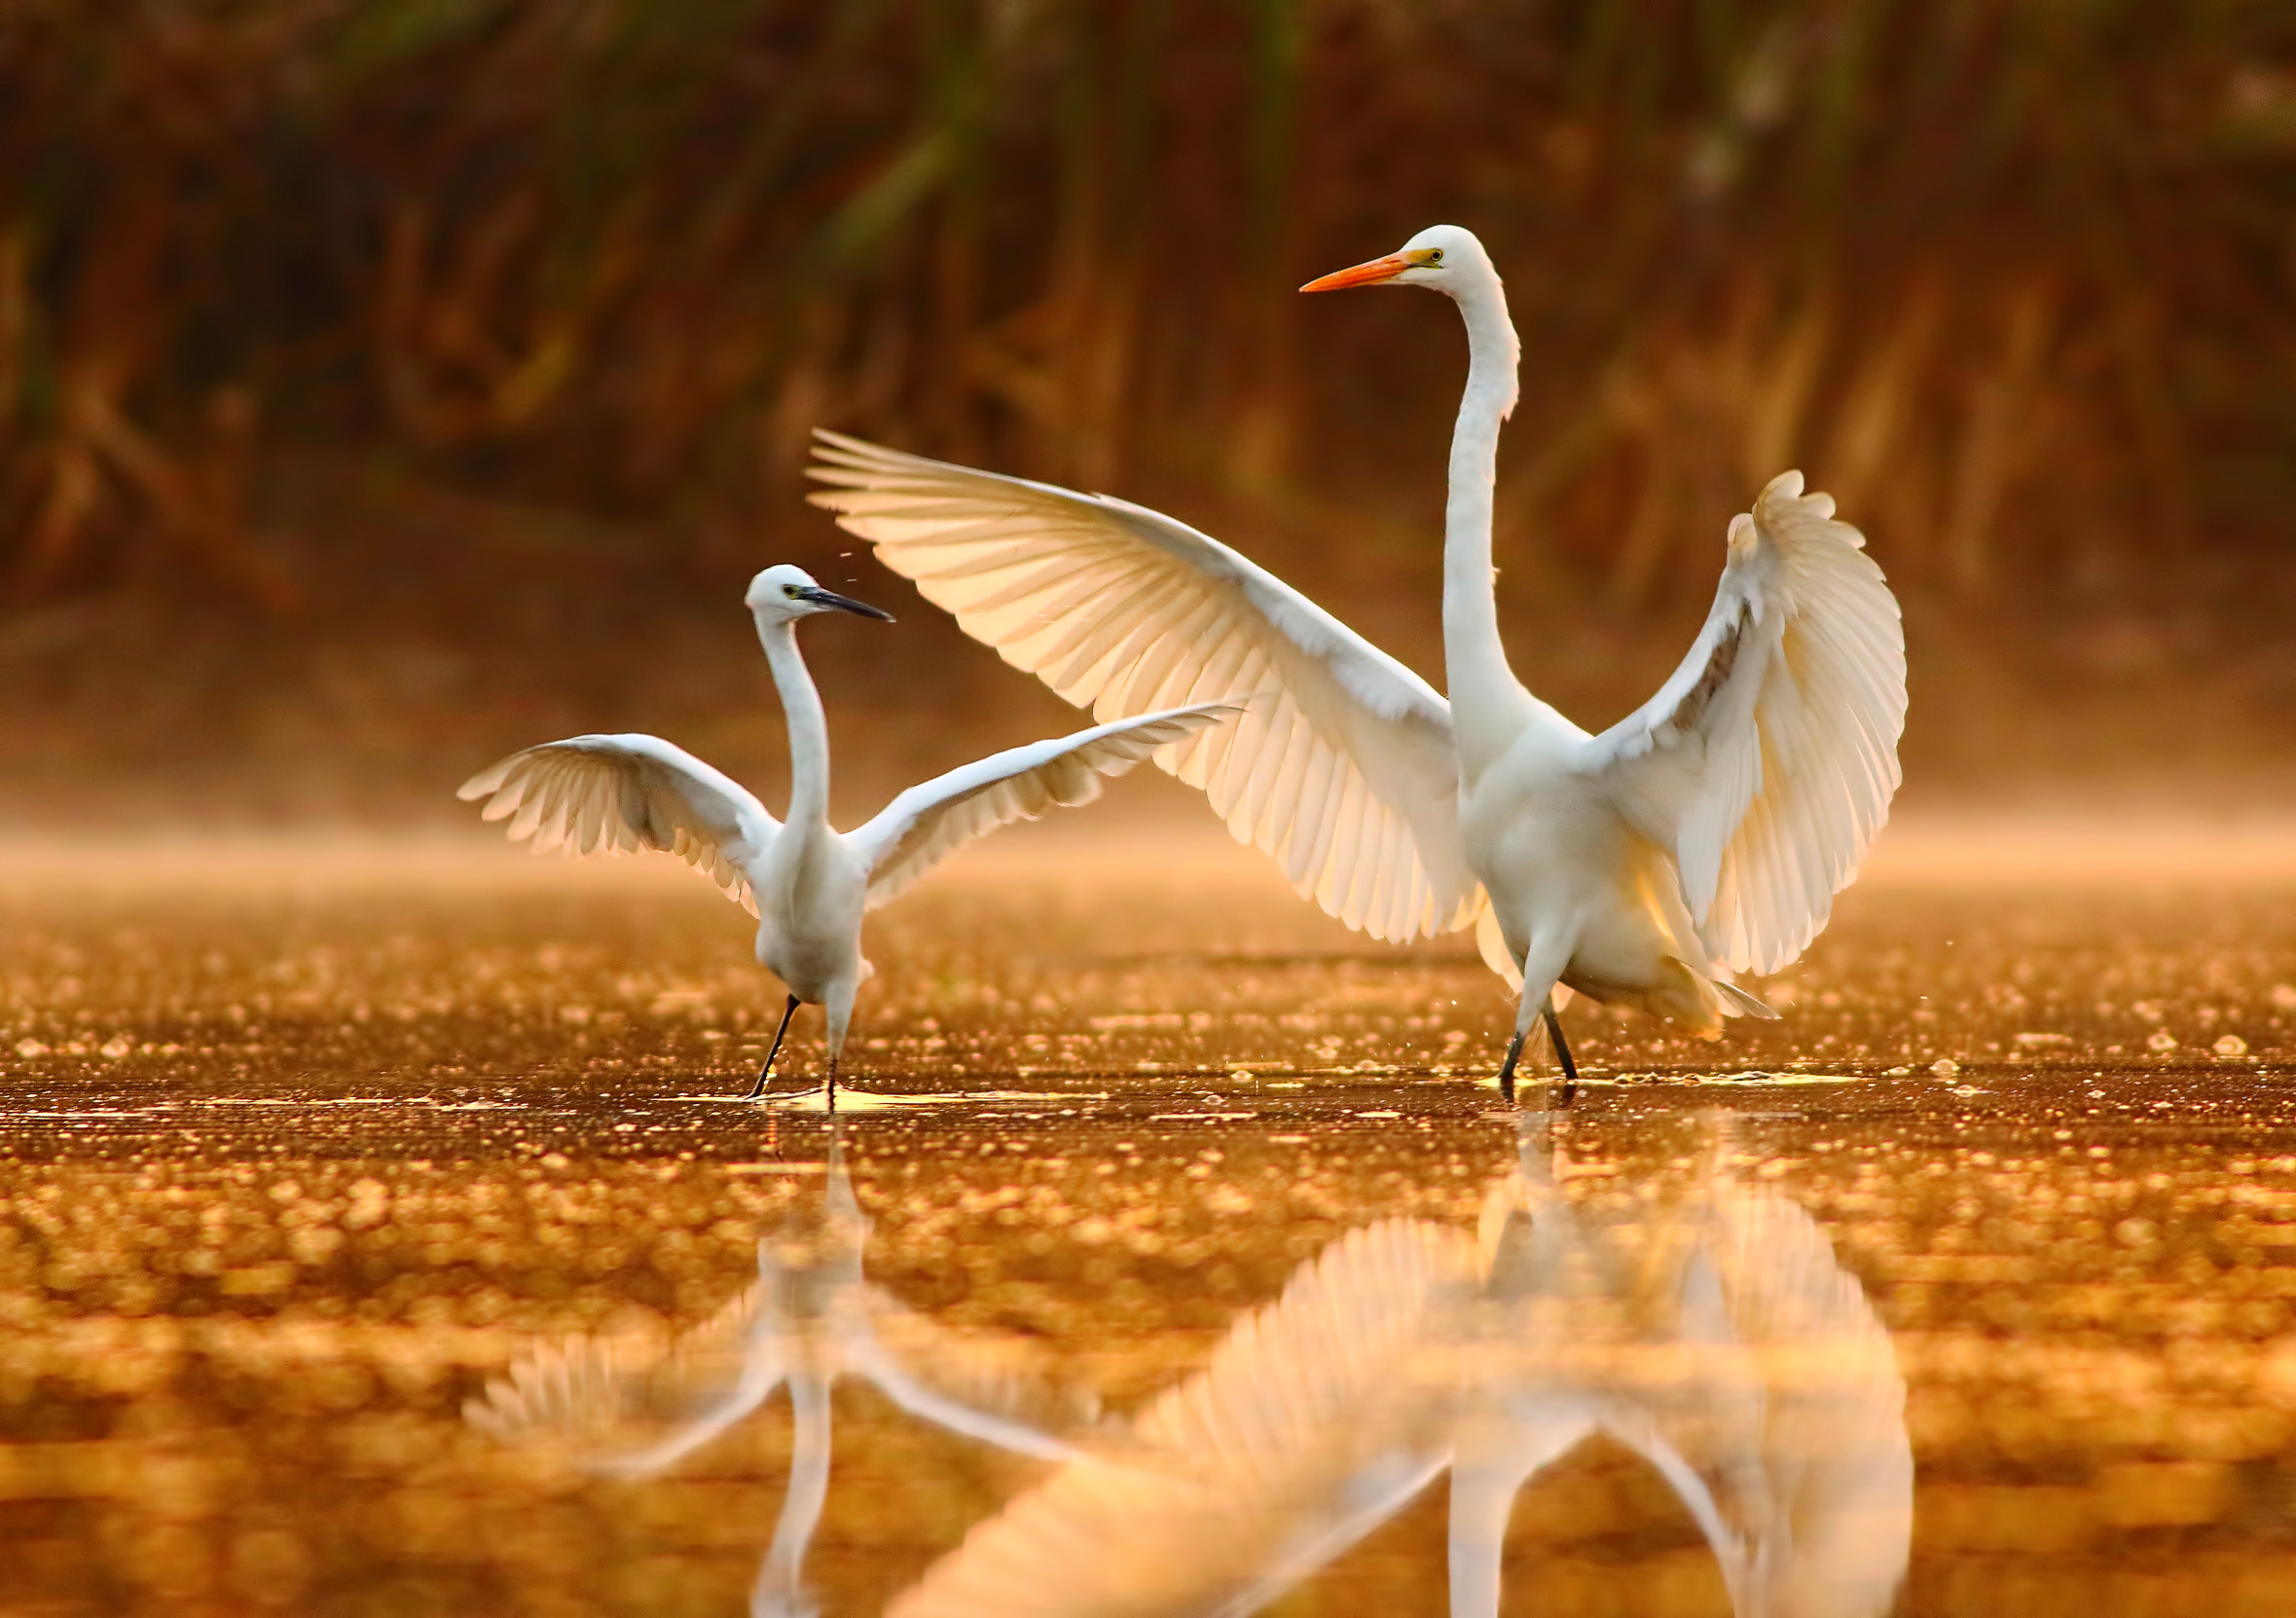 A Little Egret stood next to a Great White Egret flapping their wings in shallow water at sunset.